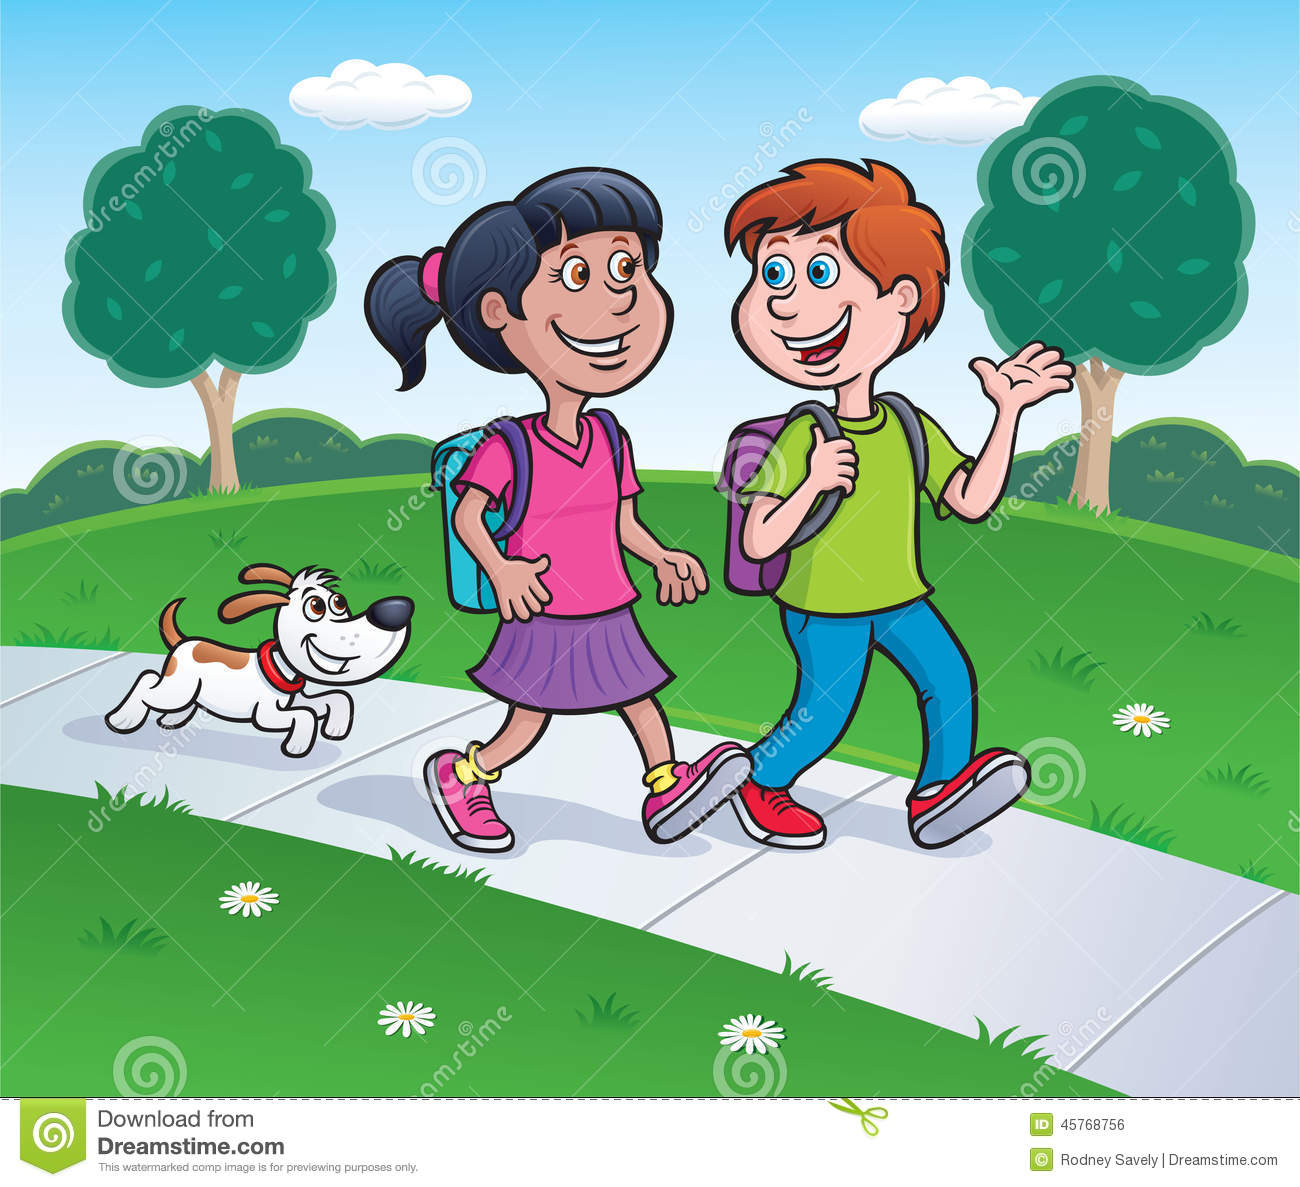     Boy Walking From School With Backpacks On While Talking While A Dog